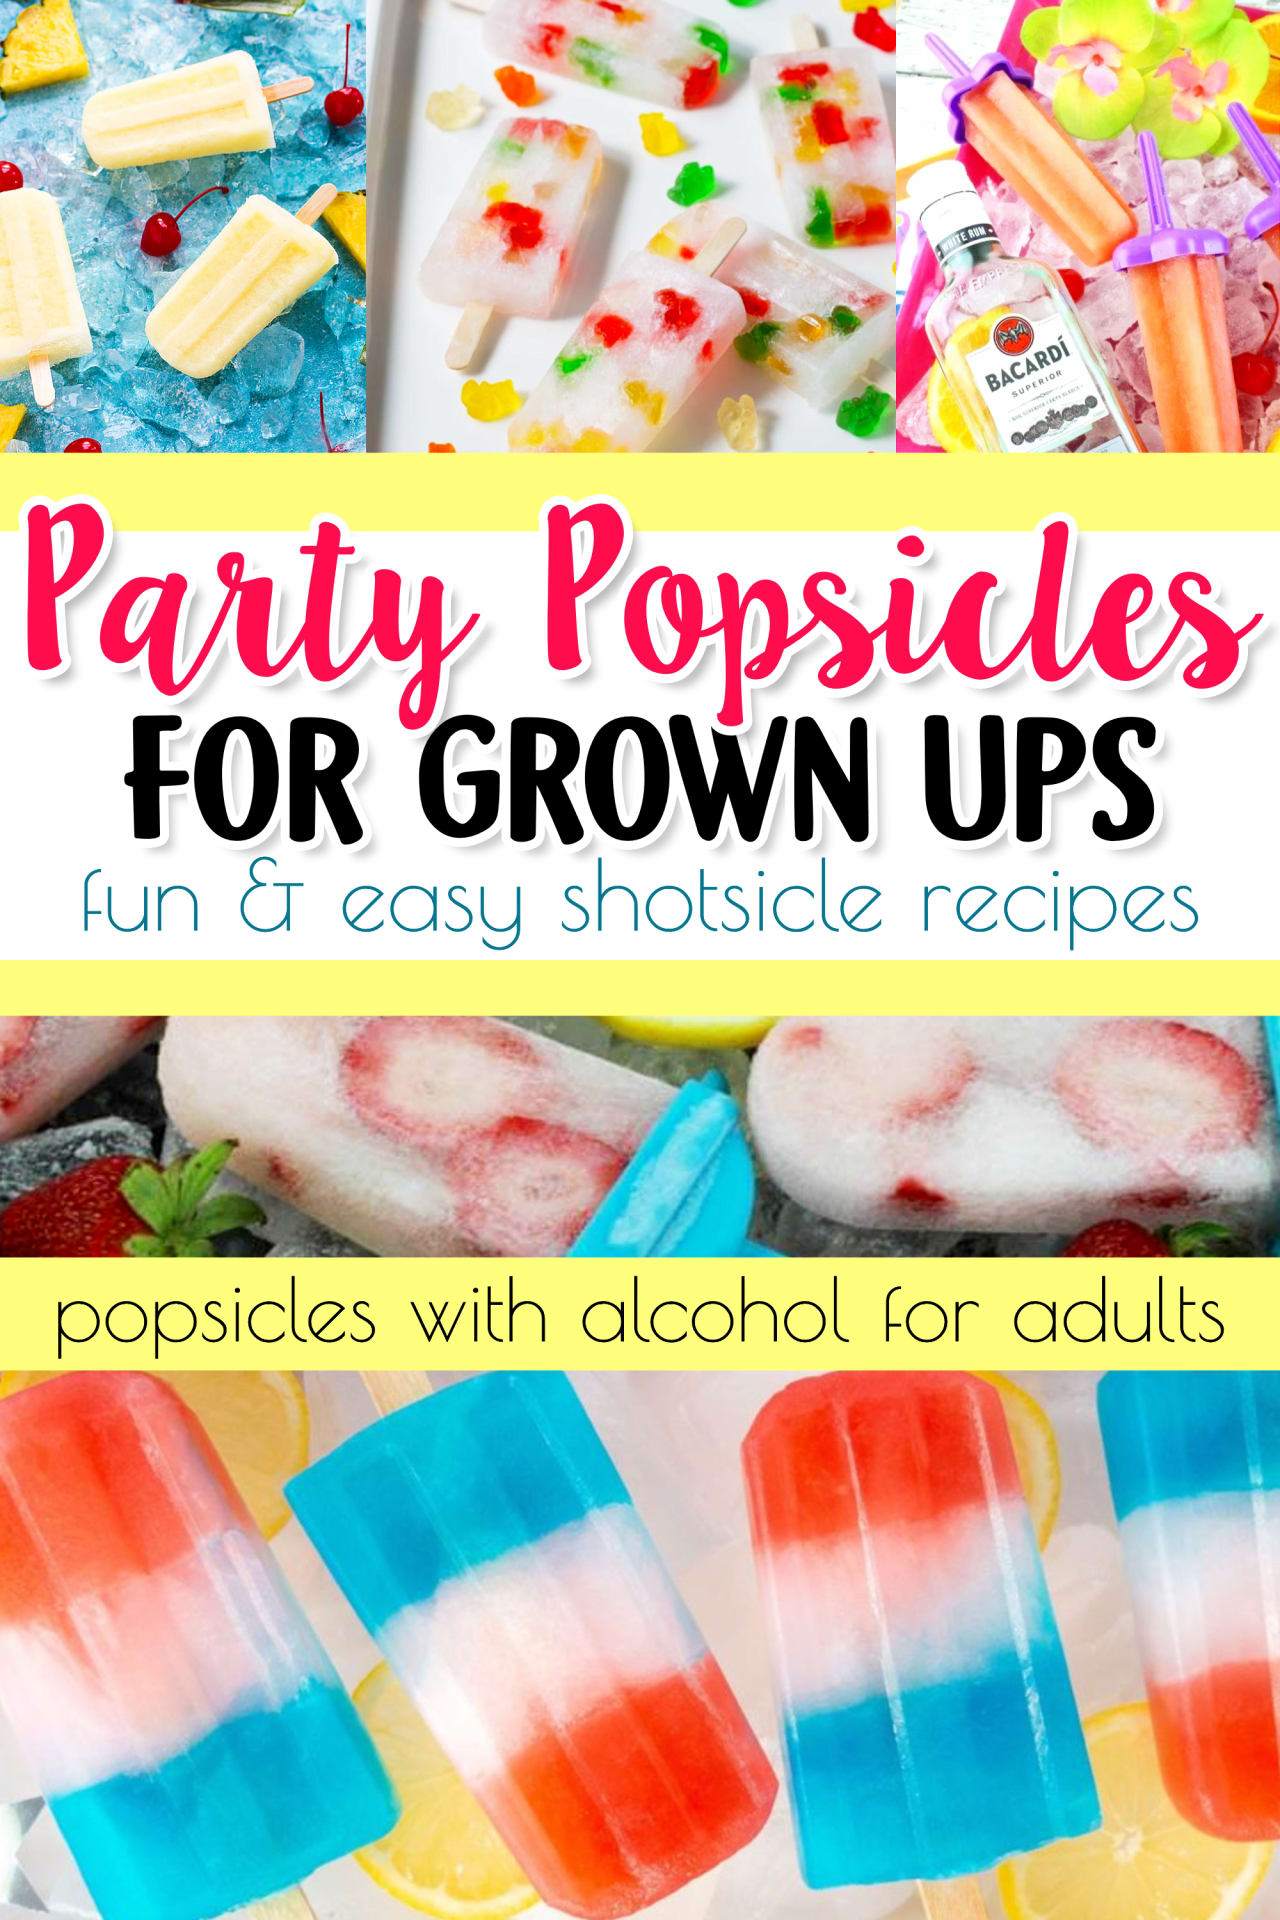 Shotsicles! Summer Party Popsicle Recipes for ADULTS - Popsicles With Alcohol For The Grown-Ups